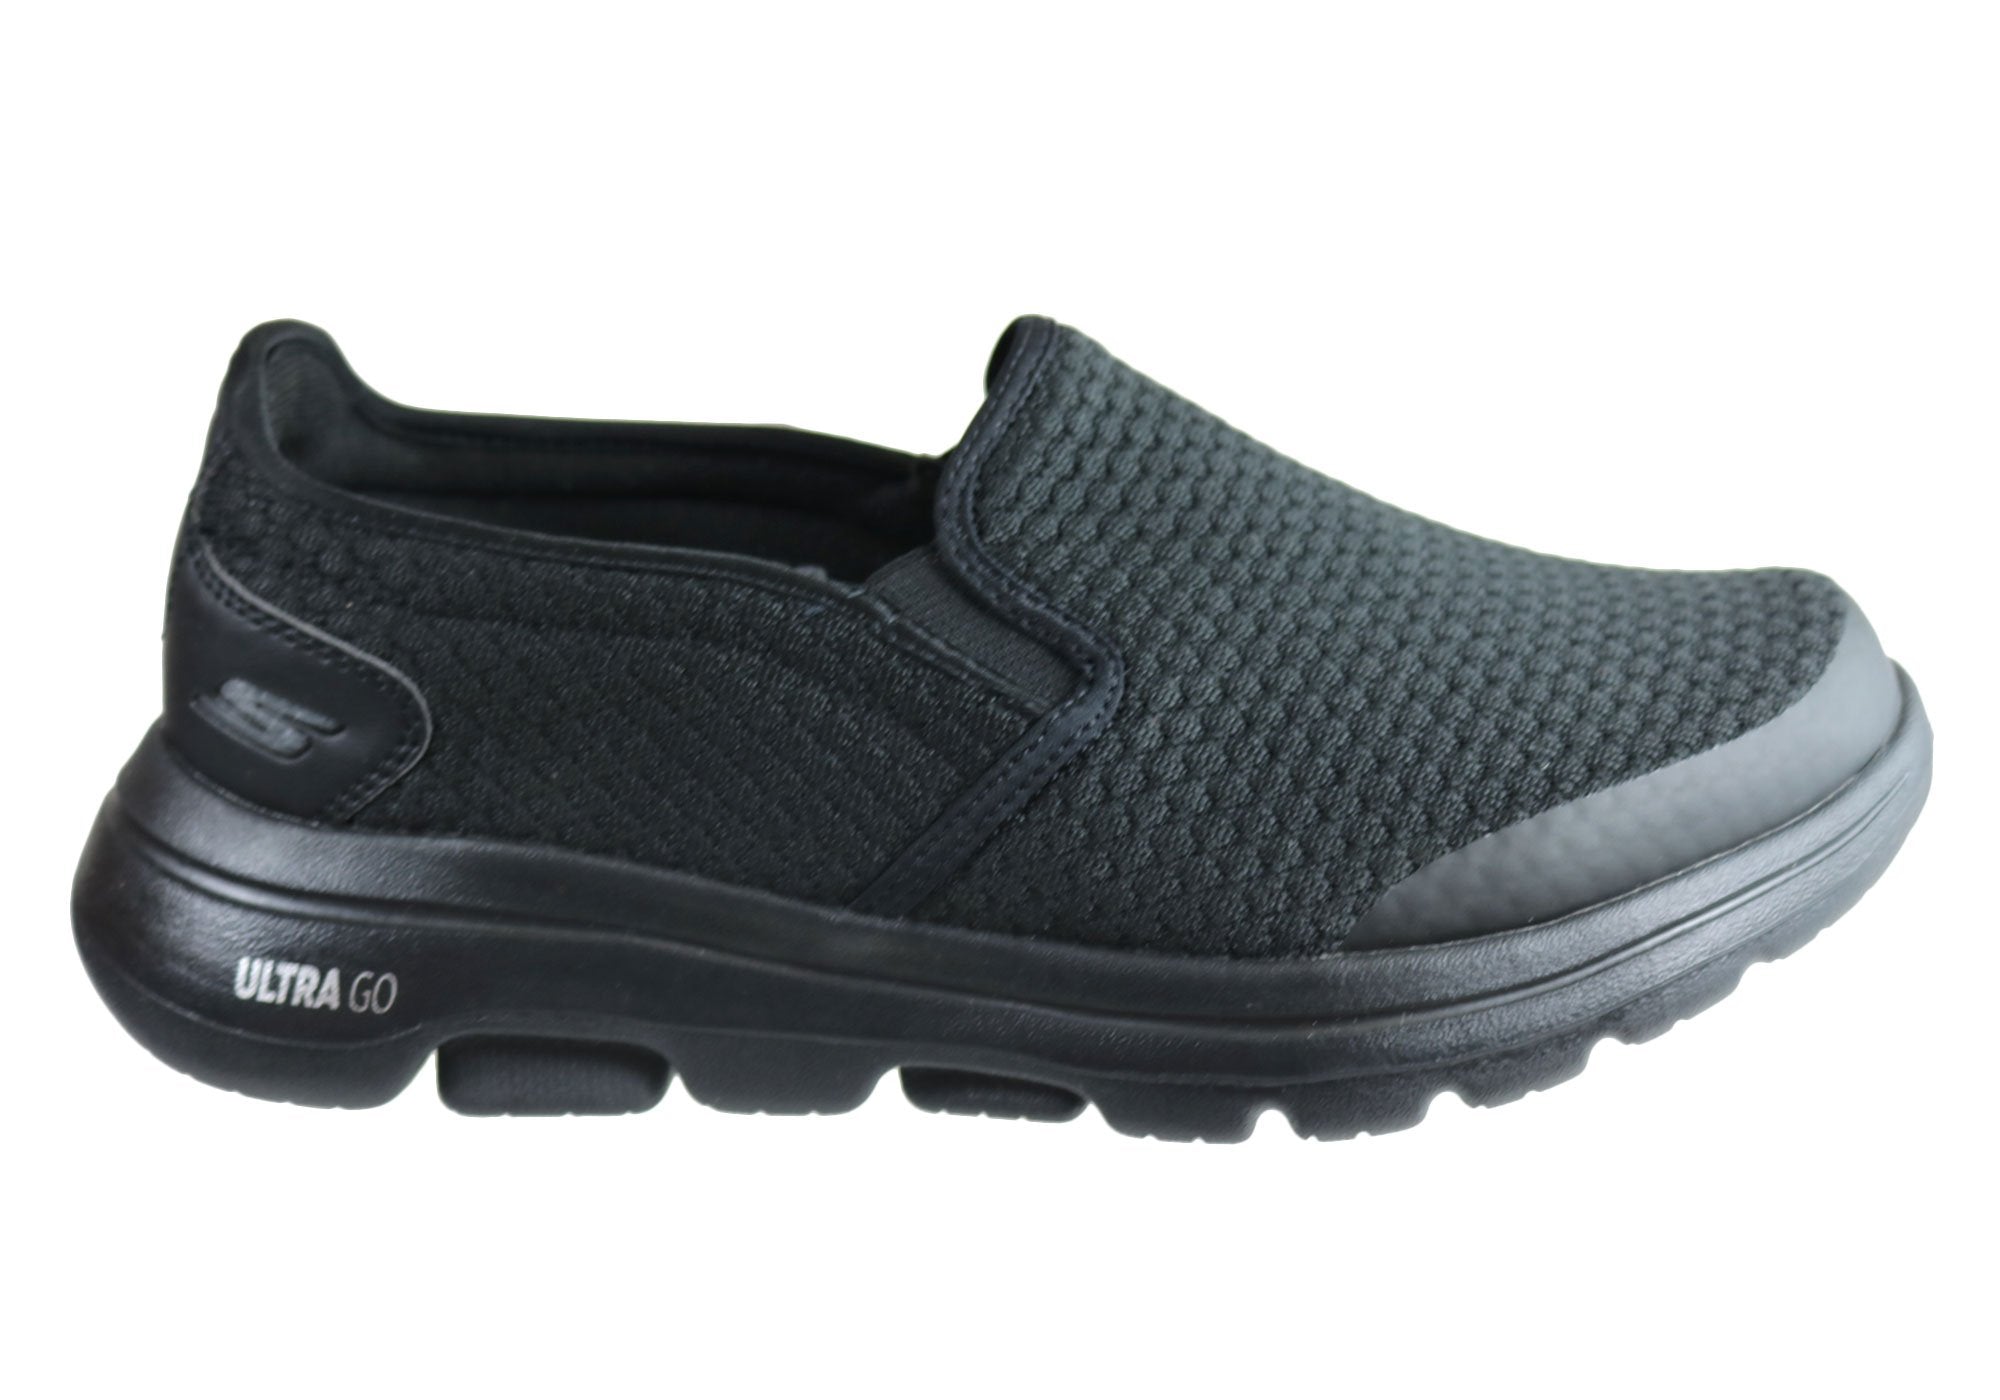 skechers shoes extra wide